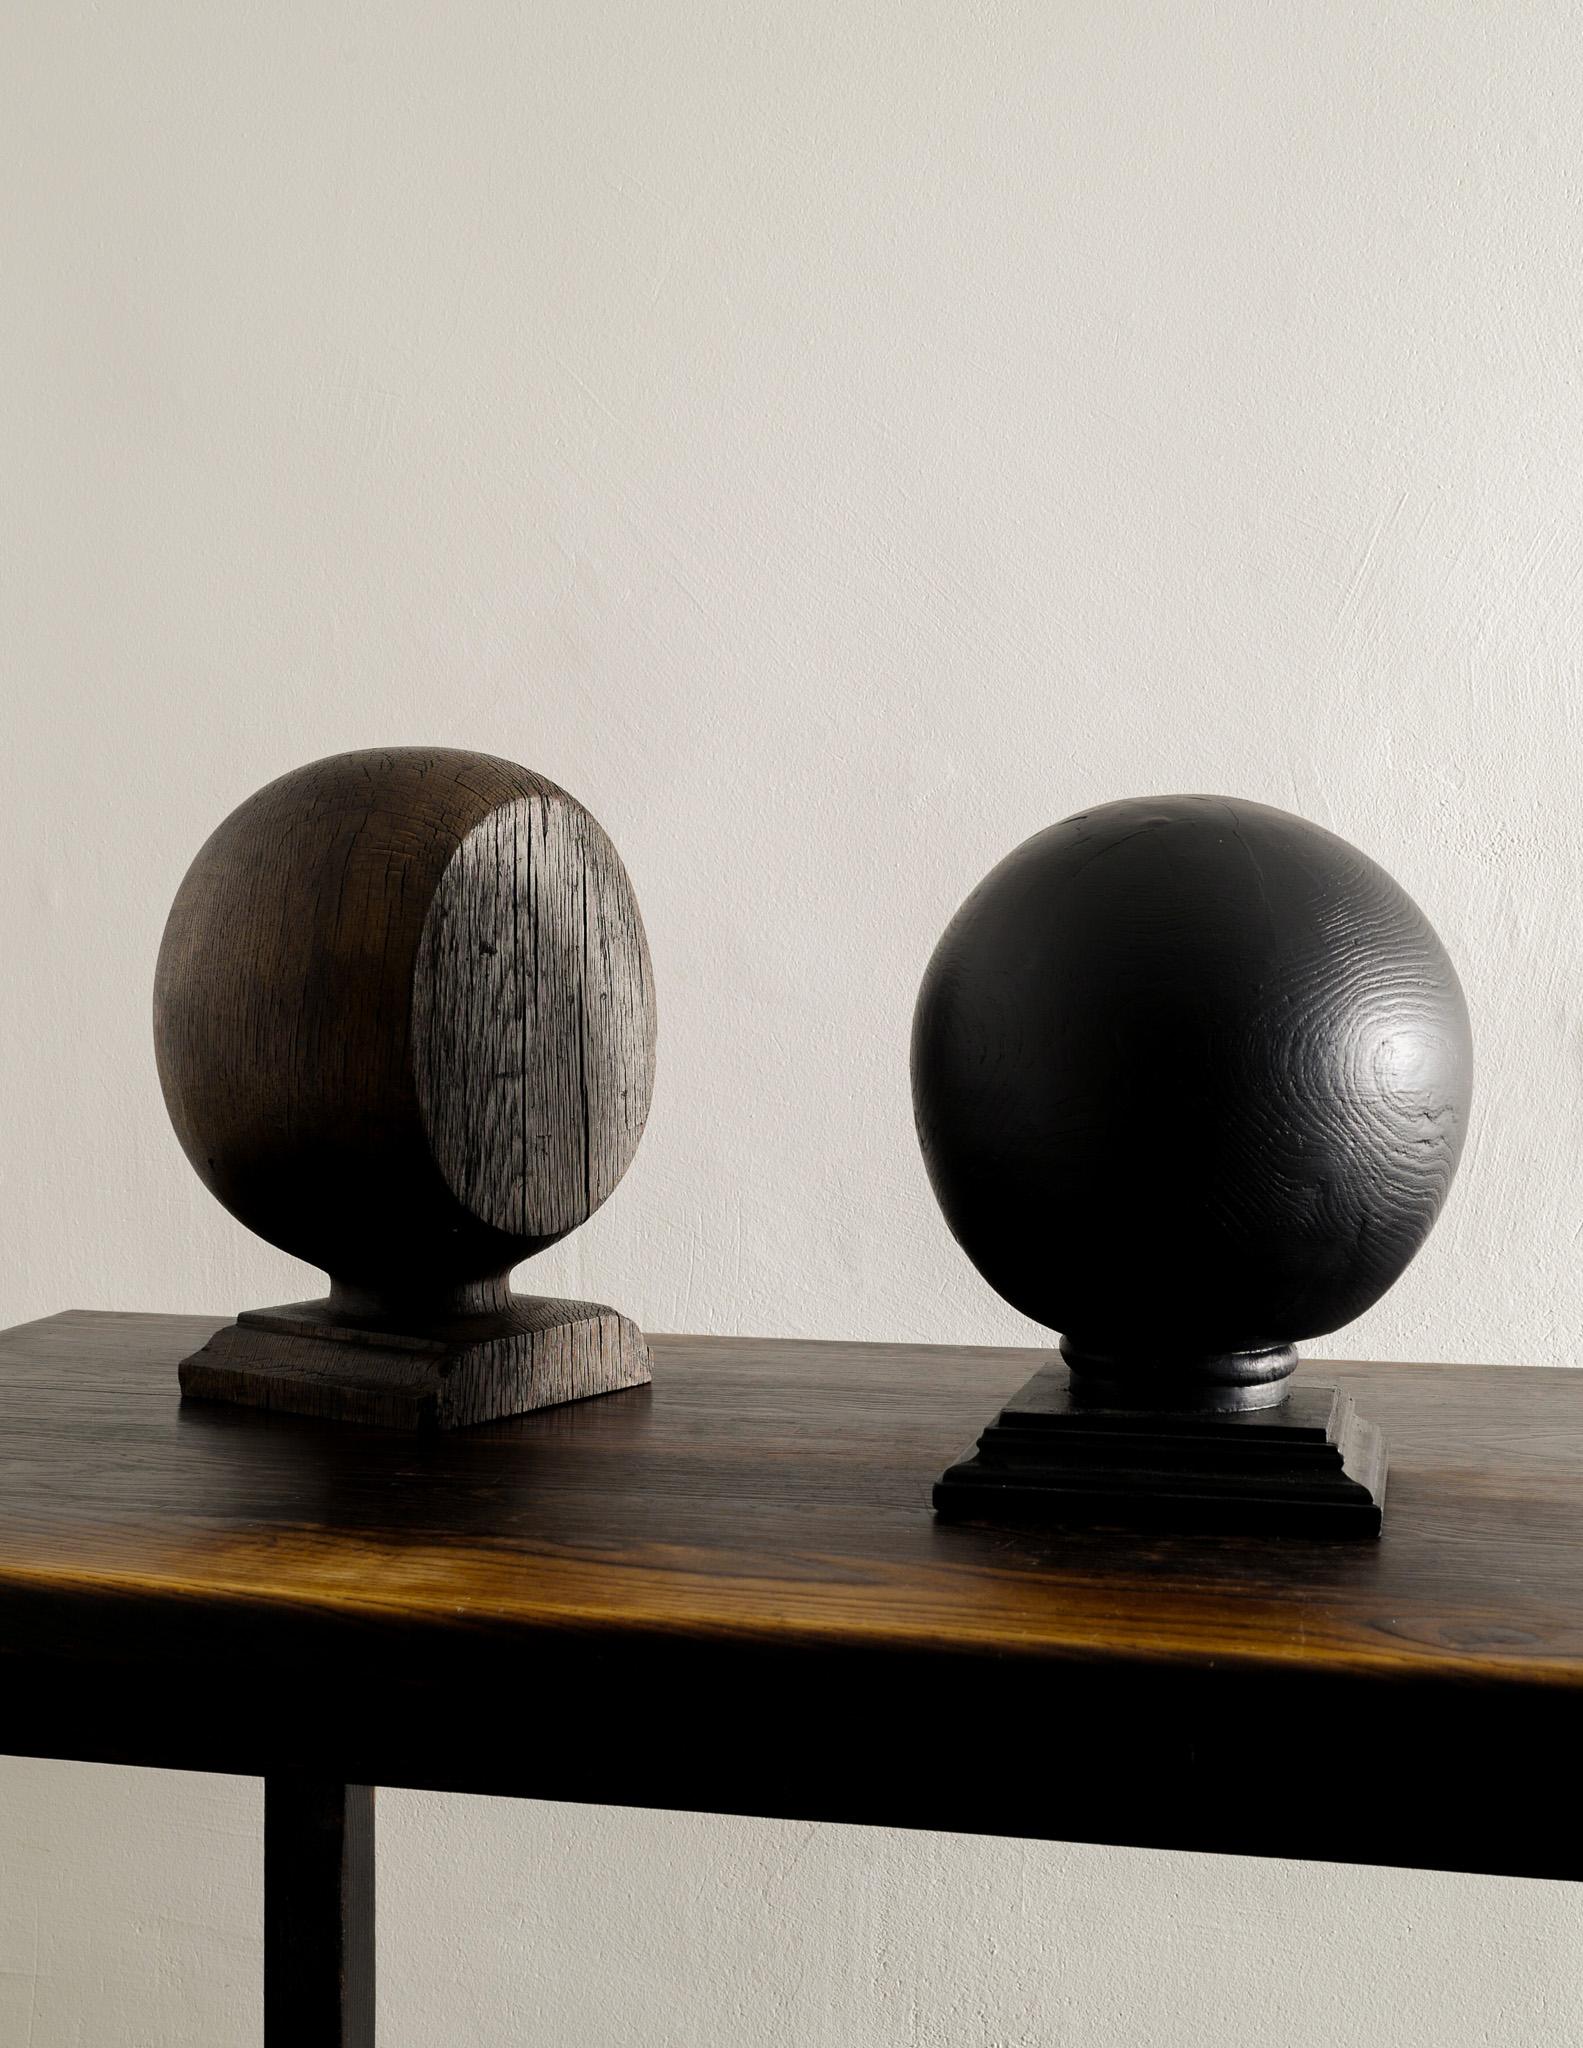 Pair of British colonial wooden sculptural globes. The brown one is in solid oak and the black in stained pine. In great vintage condition and very decorative. 
Sold as a set. 

Dimensions: Brown: H: 39 x W: 29 x D: 25 cm Black: H: 34 x W/D: 36 cm 
